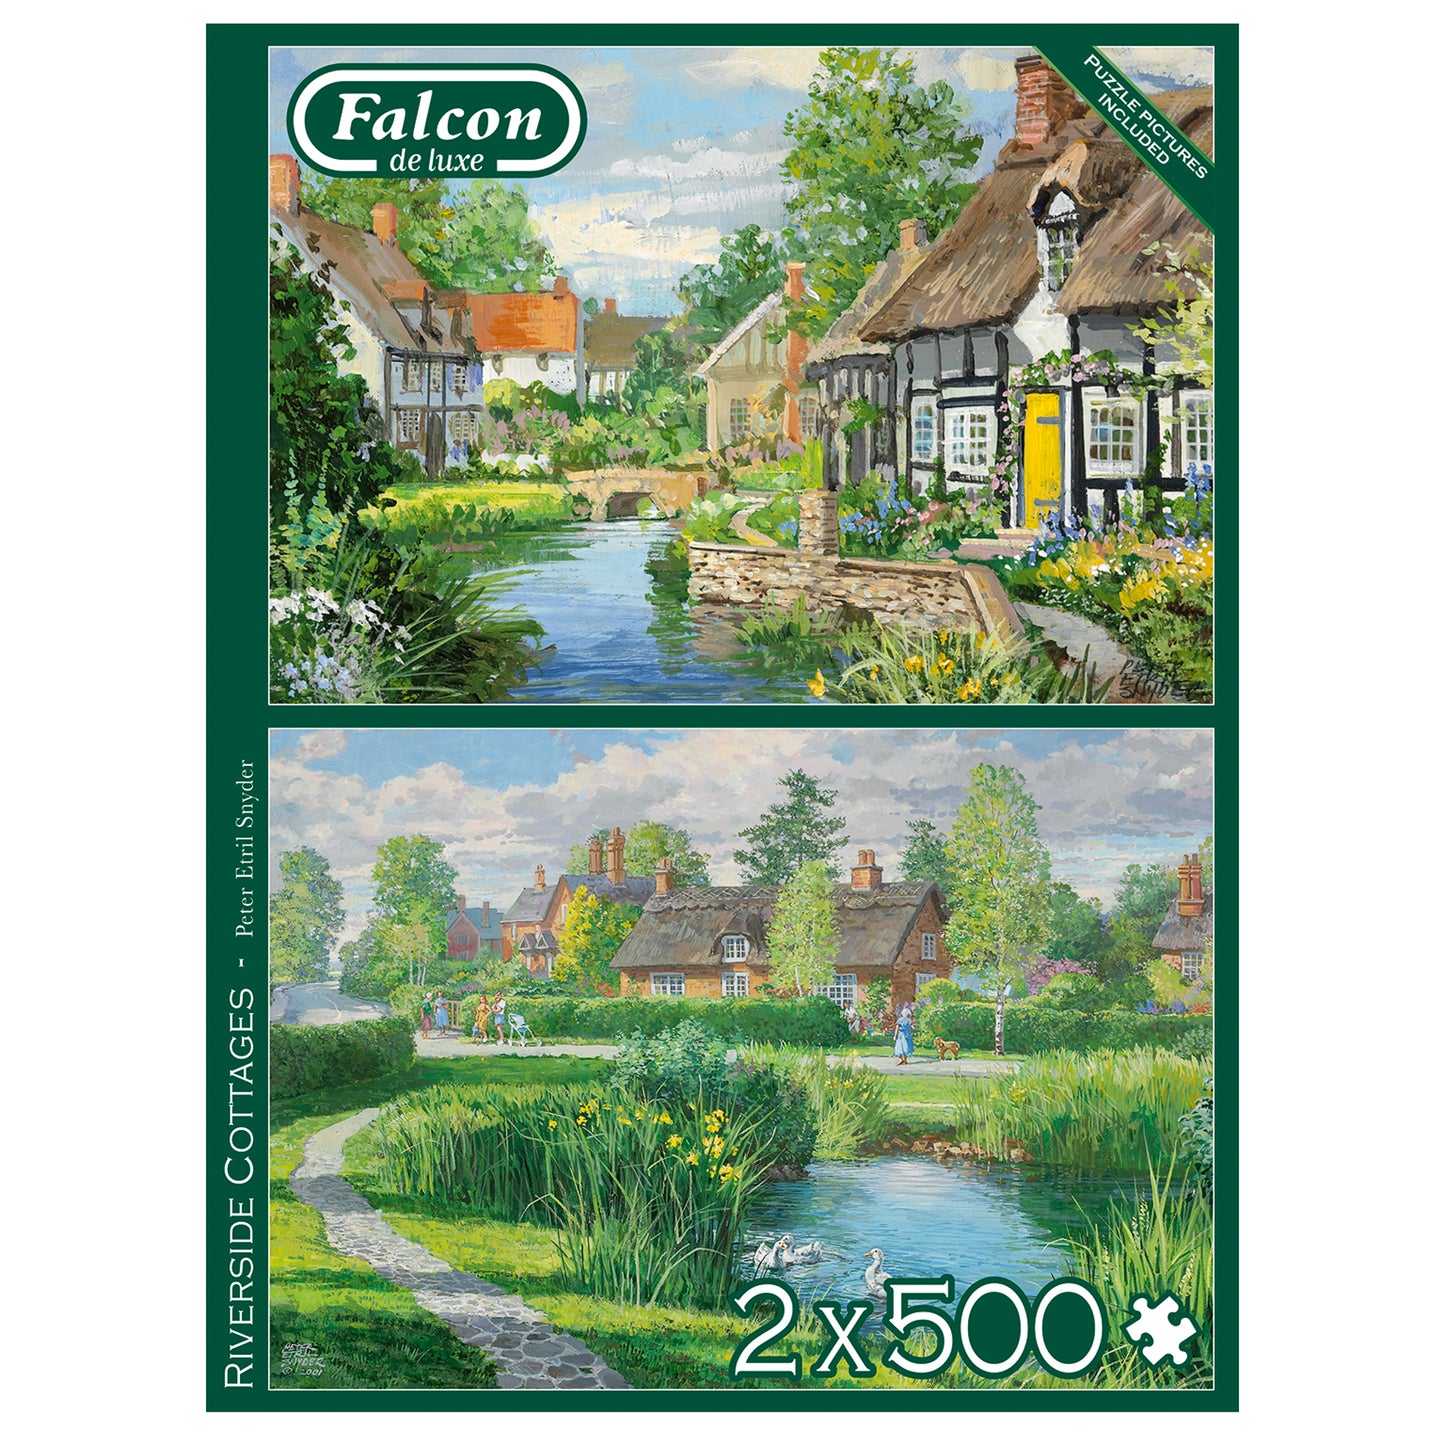 Falcon - Riverside Cottages (2x500 pieces) - product image - Jumboplay.com